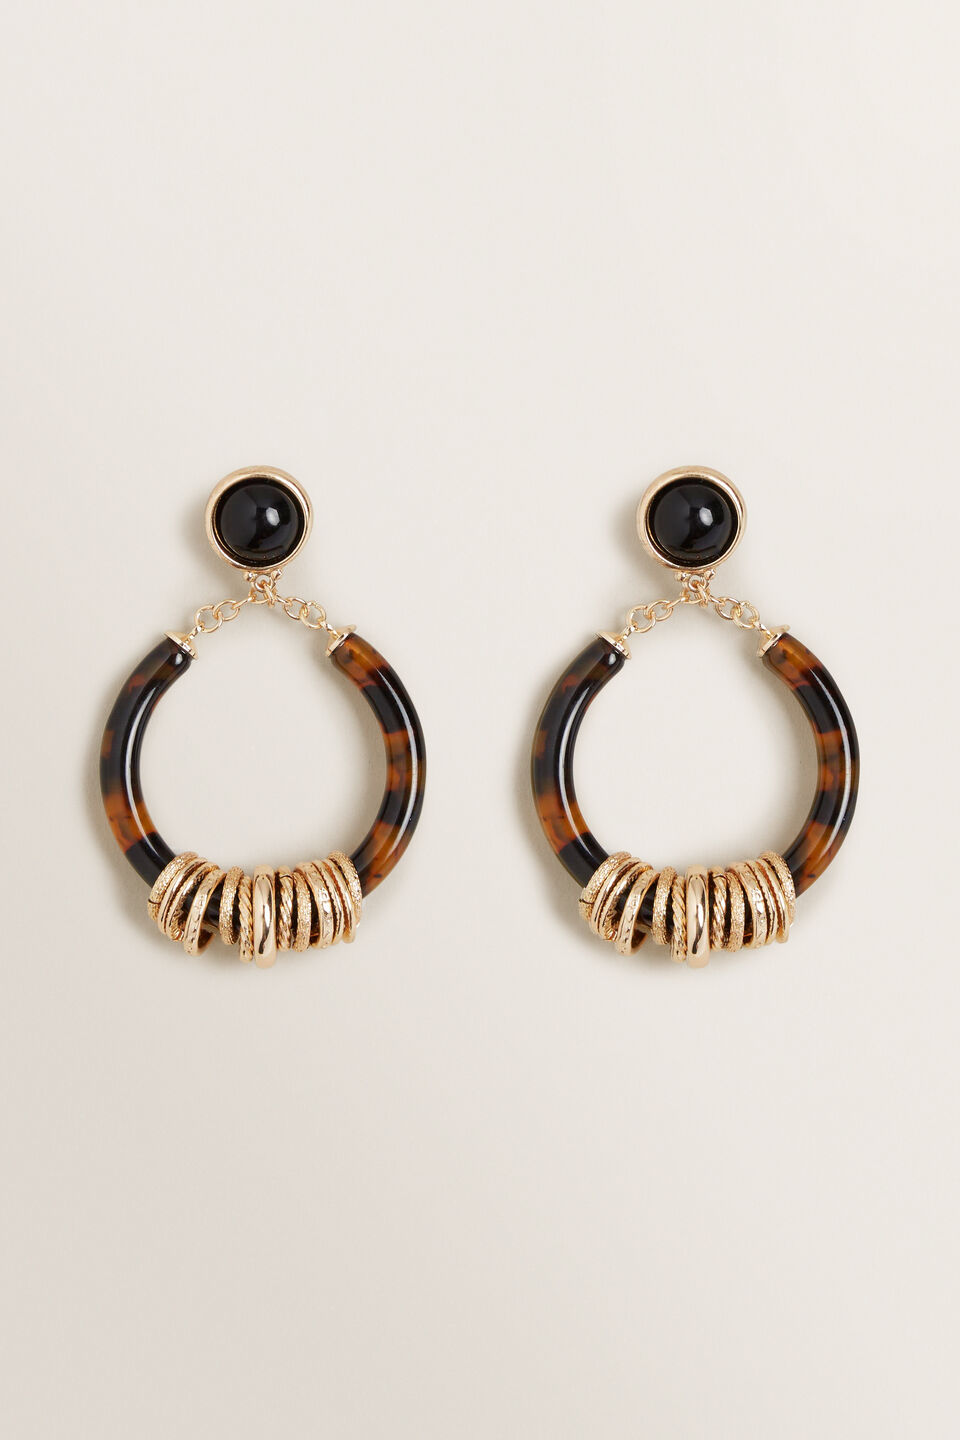 Tort/Gold Ring Hoops  